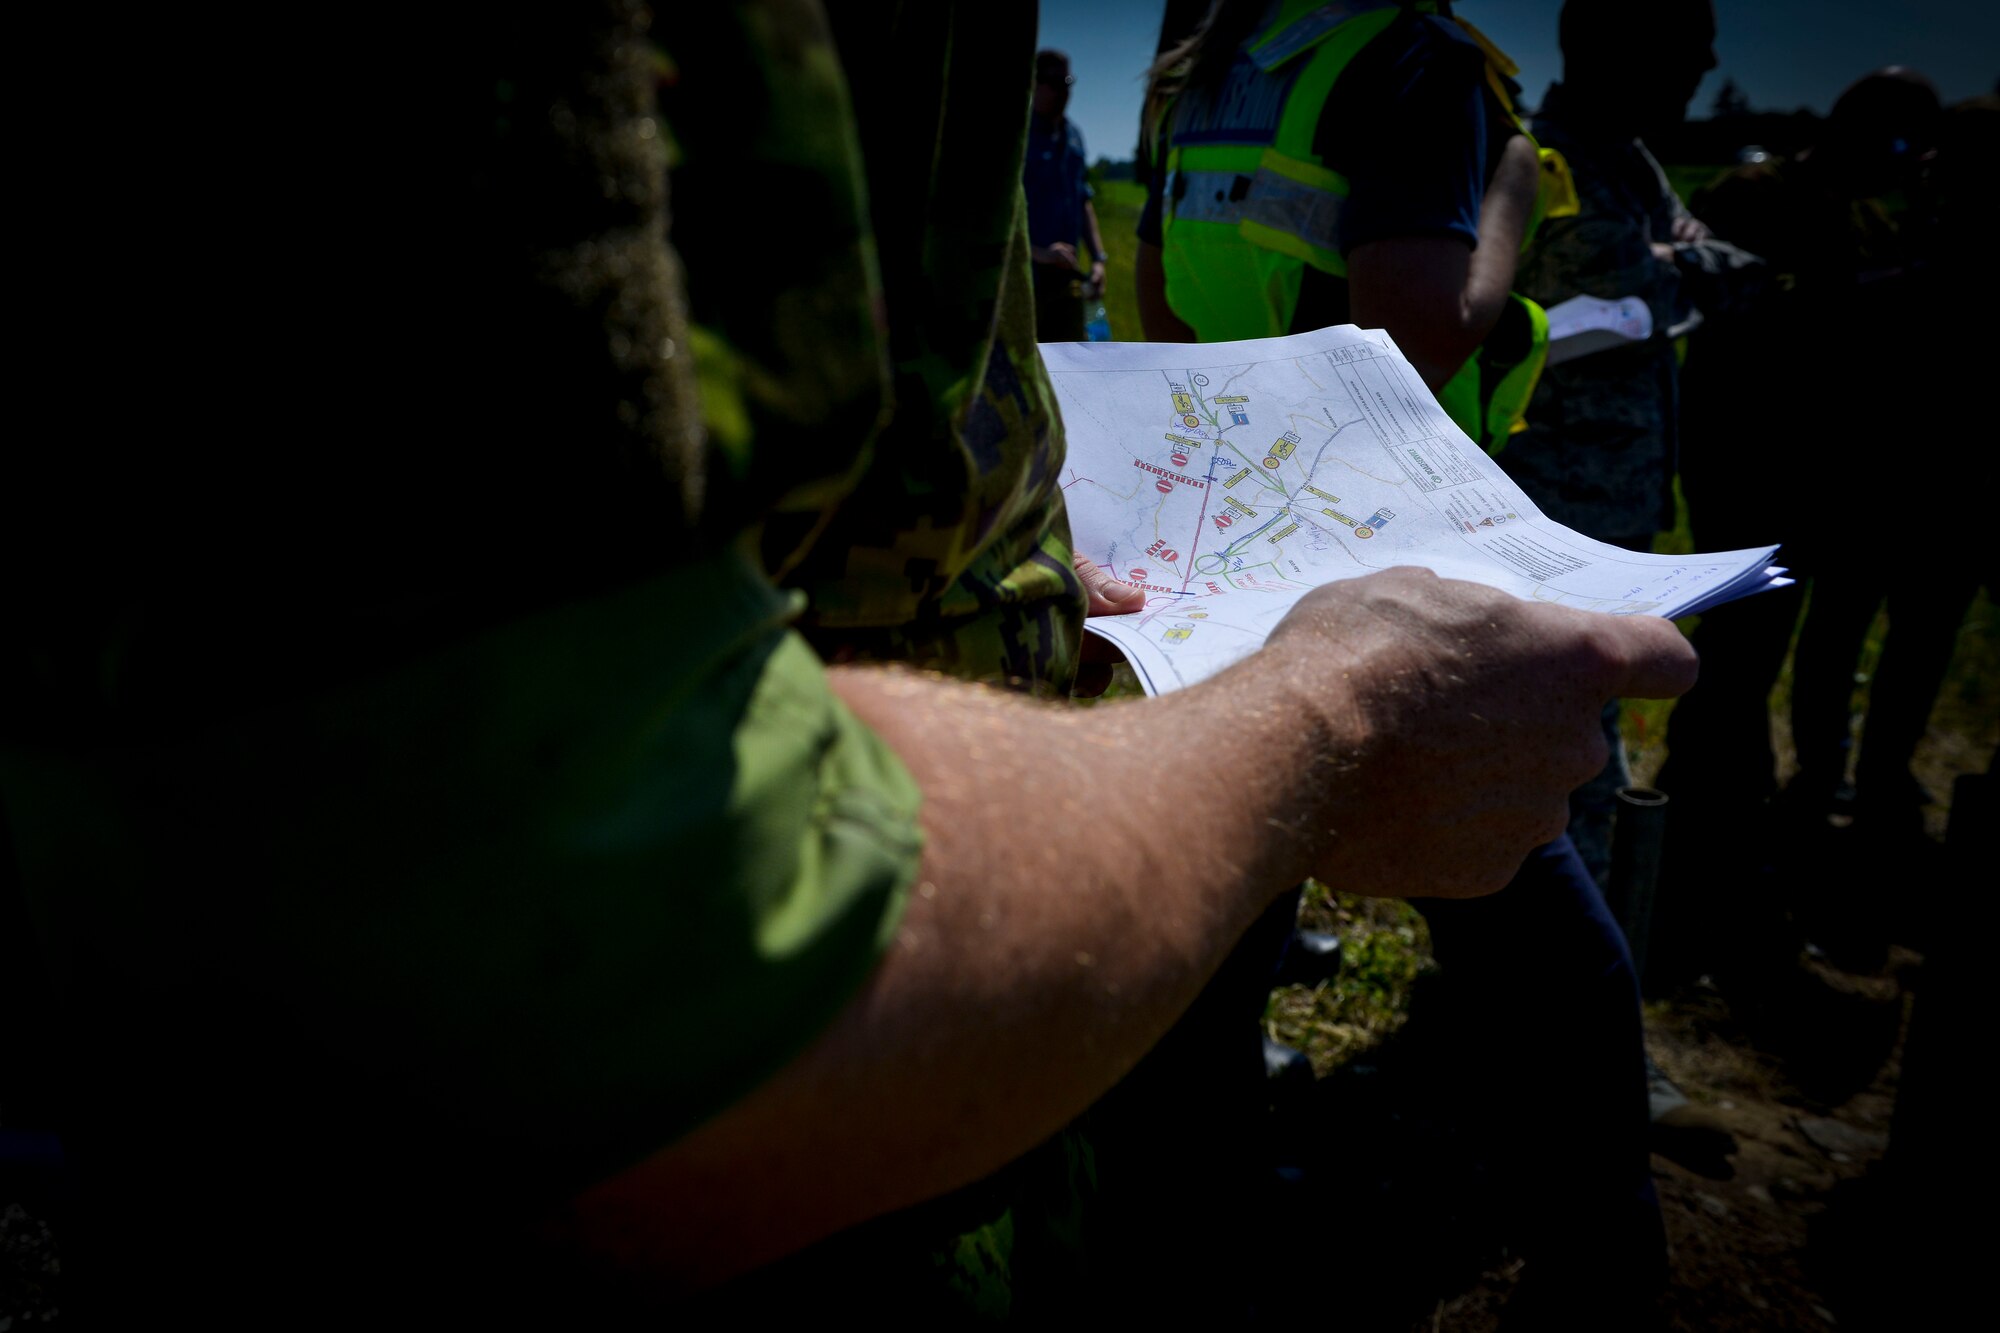 An Estonian airman holds a map of the area before NATO forces prepare a highway for aircraft to land on June 21, 2016, in Tallinn, Estonia. U.S. forces are in Europe participating in Saber Strike 16; a long-standing, U.S. Joint Chiefs of Staff-directed, U.S. Army Europe-led cooperative-training exercise, which has been conducted annually since 2010.  This year’s exercise will focus on promoting interoperability with allies and regional partners. The United States has enduring interests in supporting peace and prosperity in Europe and bolstering the strength and vitality of NATO, which is critical to global security. (U.S. Air Force photo/Senior Airman Nicole Keim)